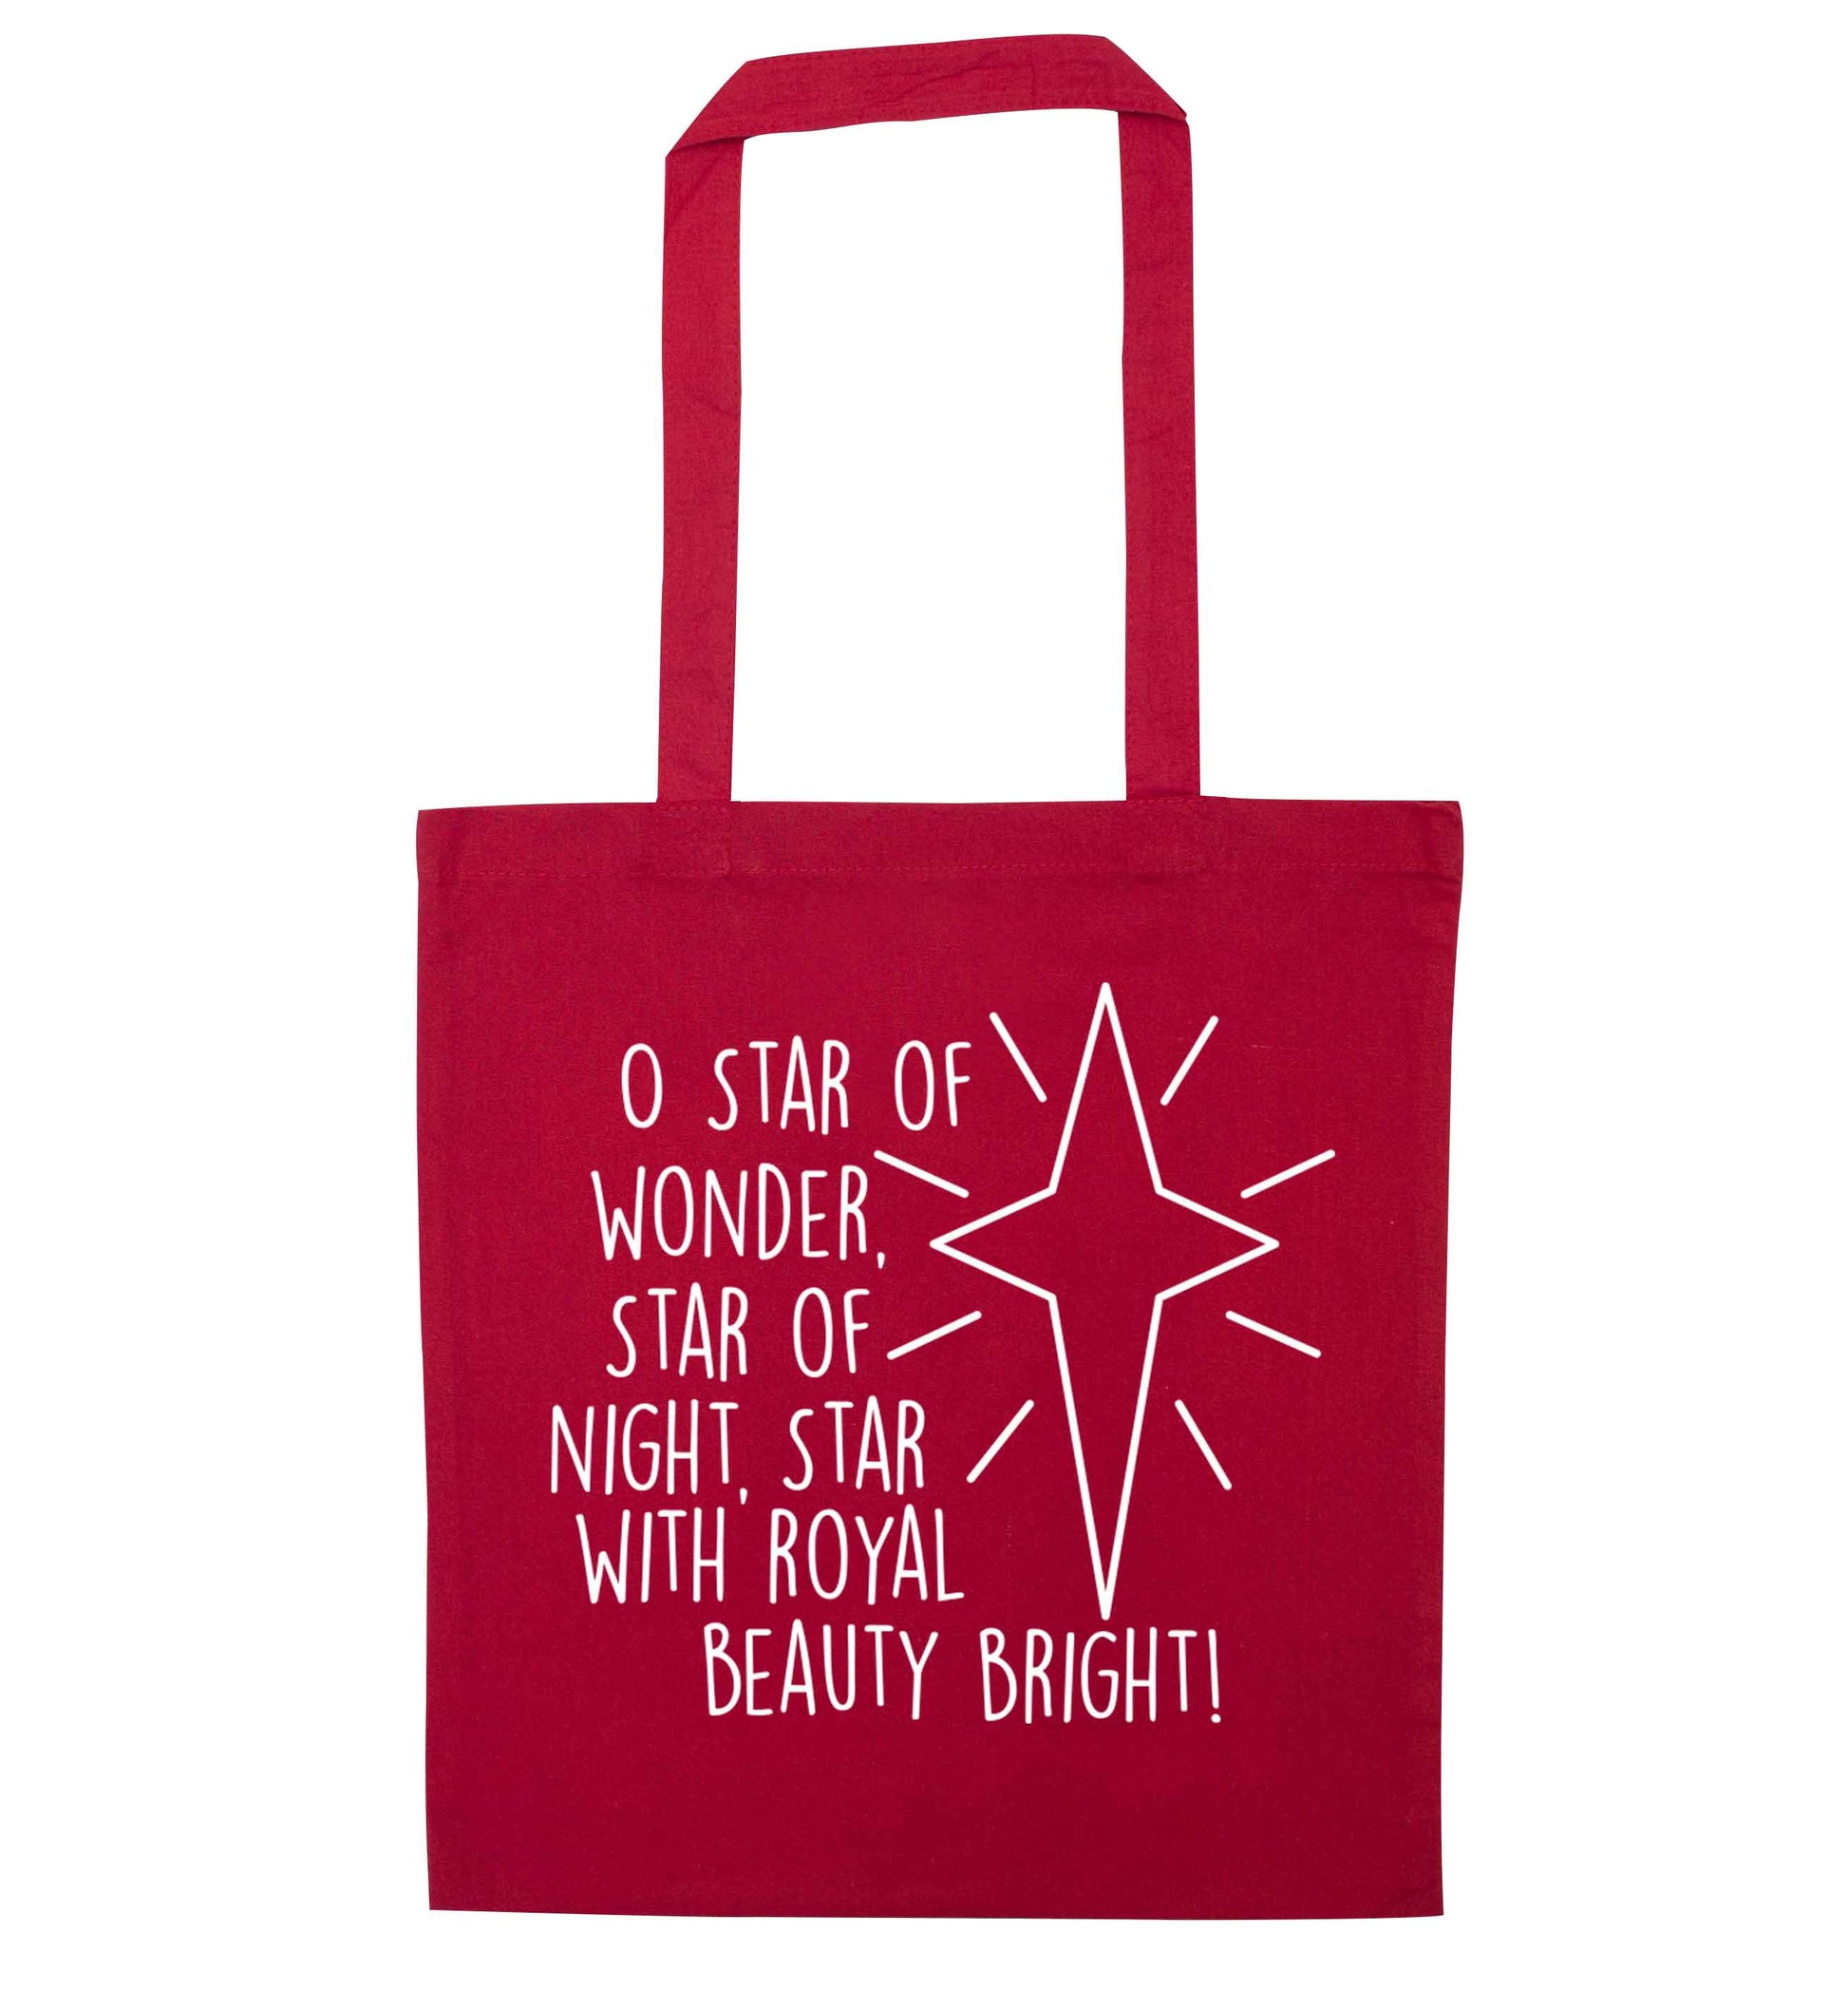 Oh star of wonder star of night, star with royal beauty bright red tote bag